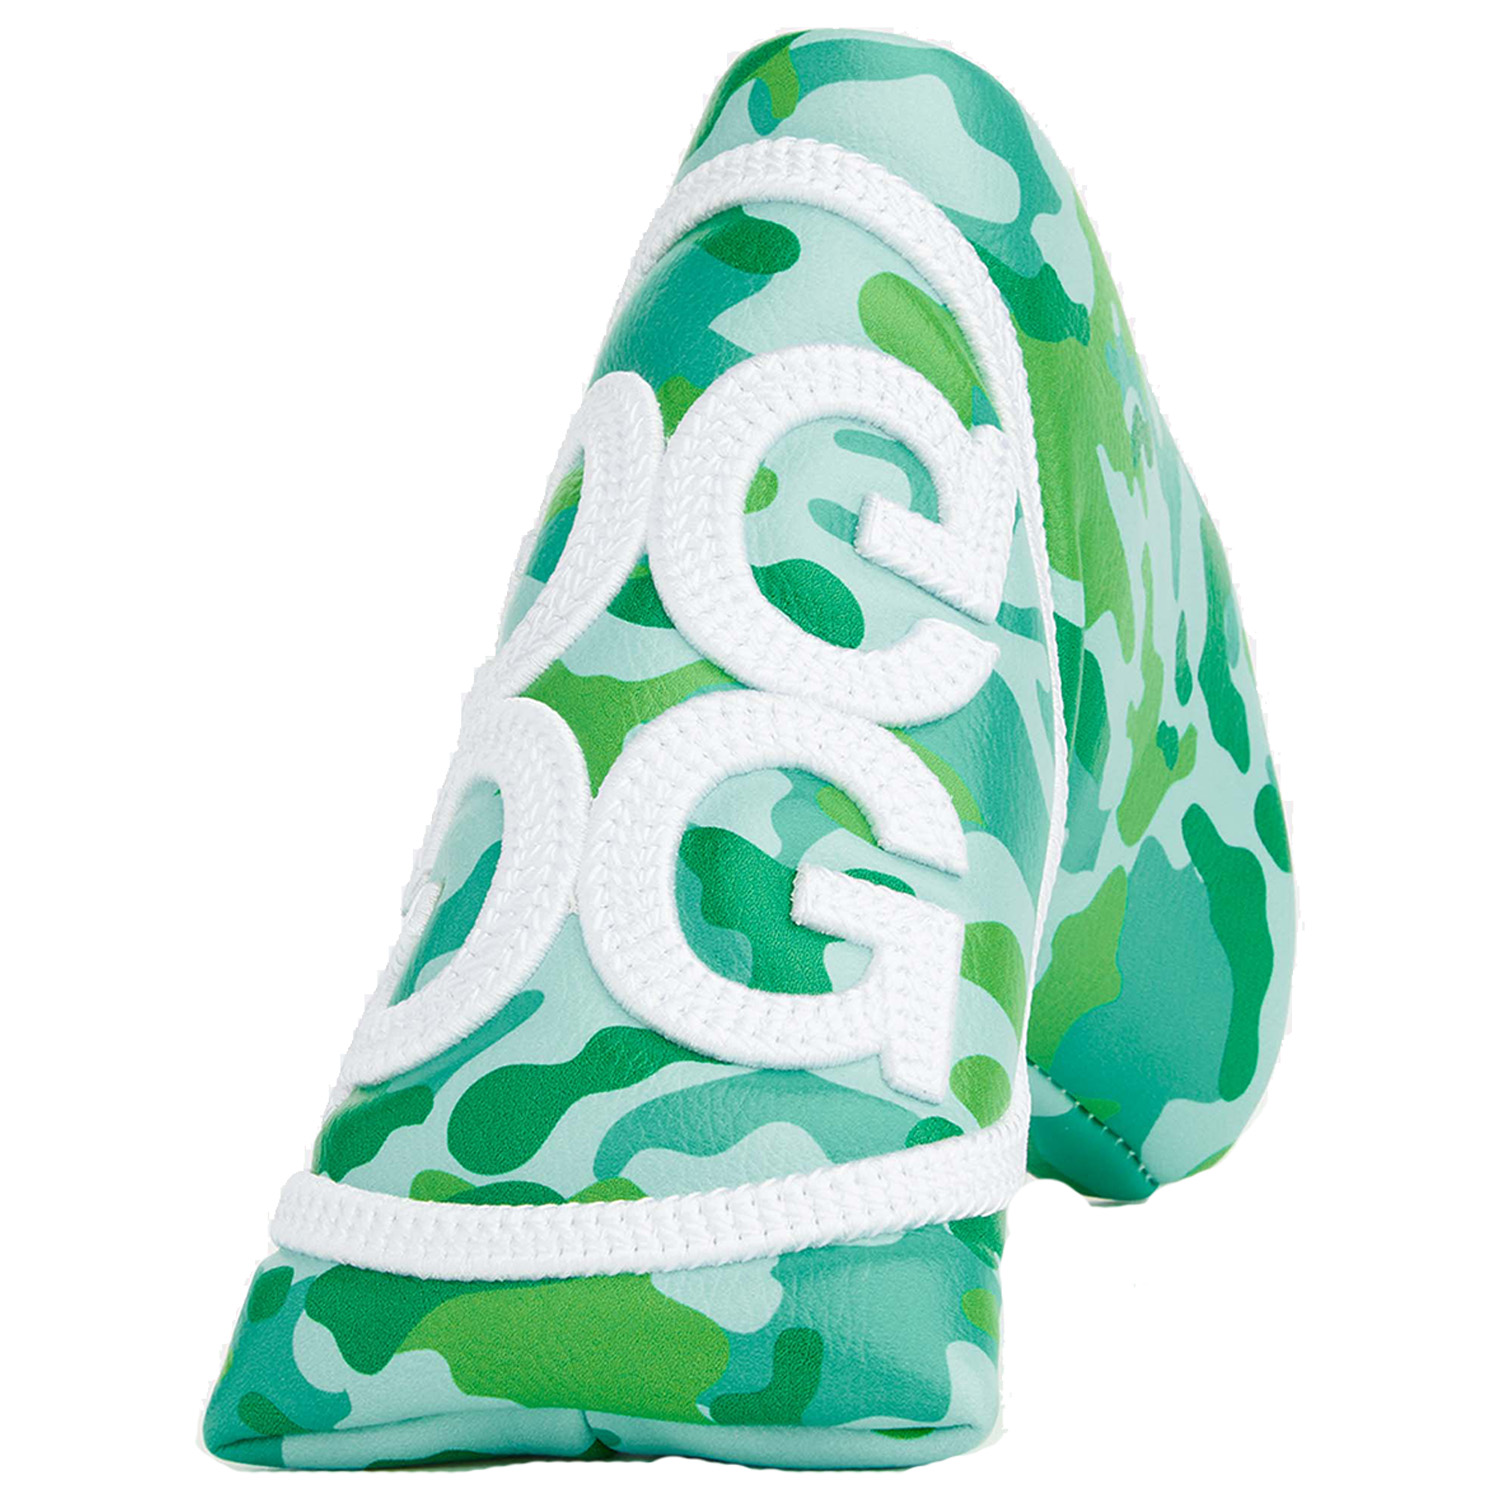 G/FORE Circle G’s Camo Blade Putter Headcover